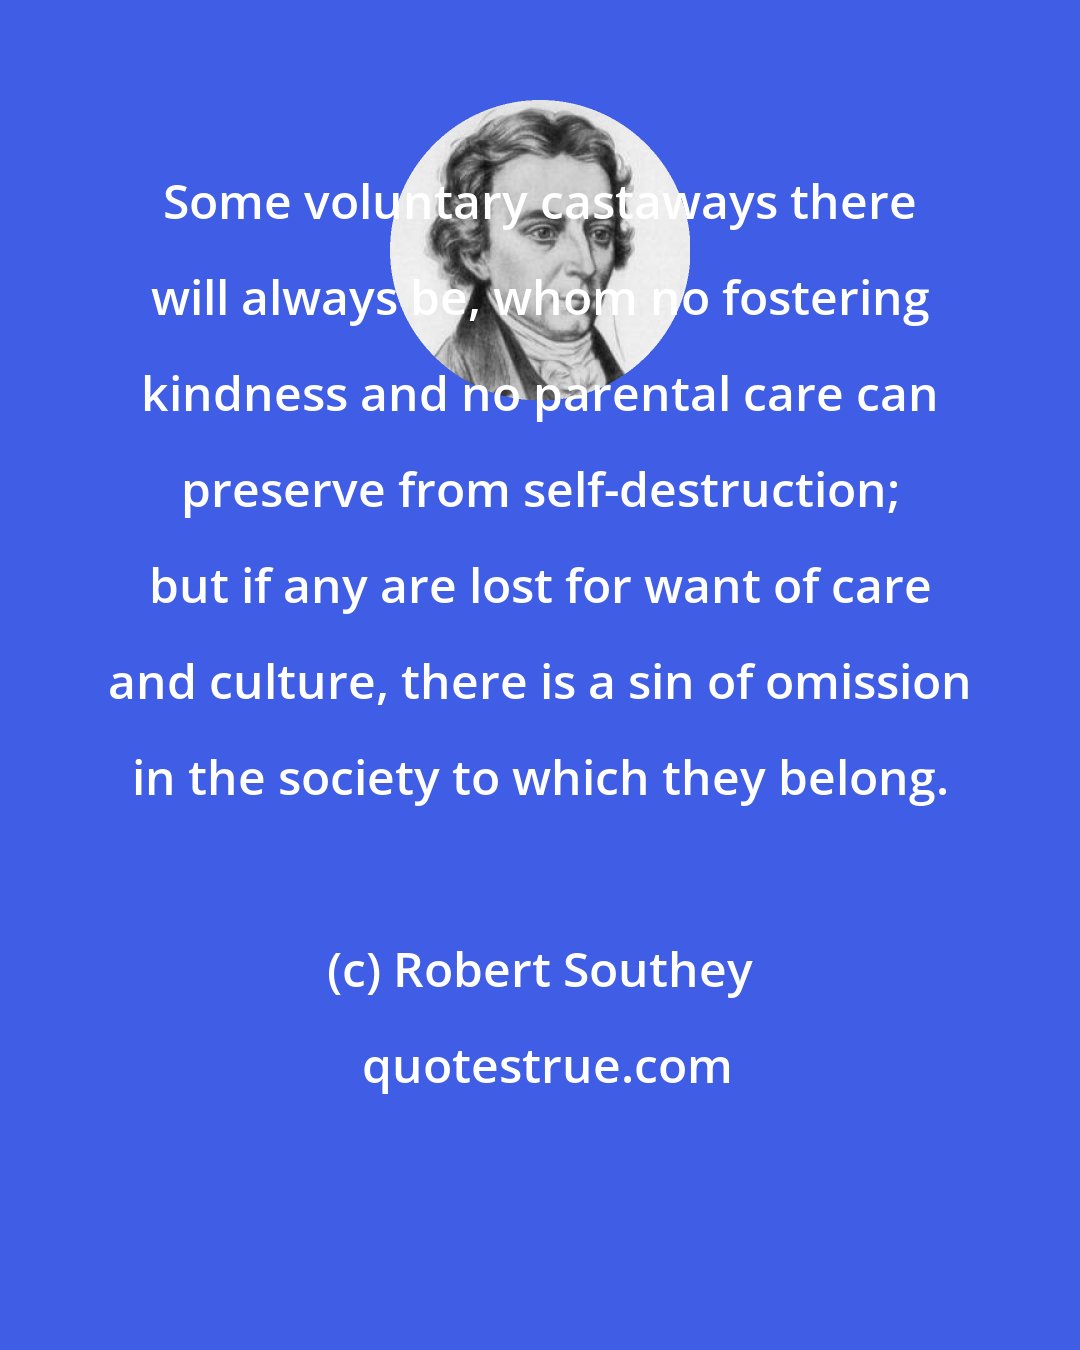 Robert Southey: Some voluntary castaways there will always be, whom no fostering kindness and no parental care can preserve from self-destruction; but if any are lost for want of care and culture, there is a sin of omission in the society to which they belong.